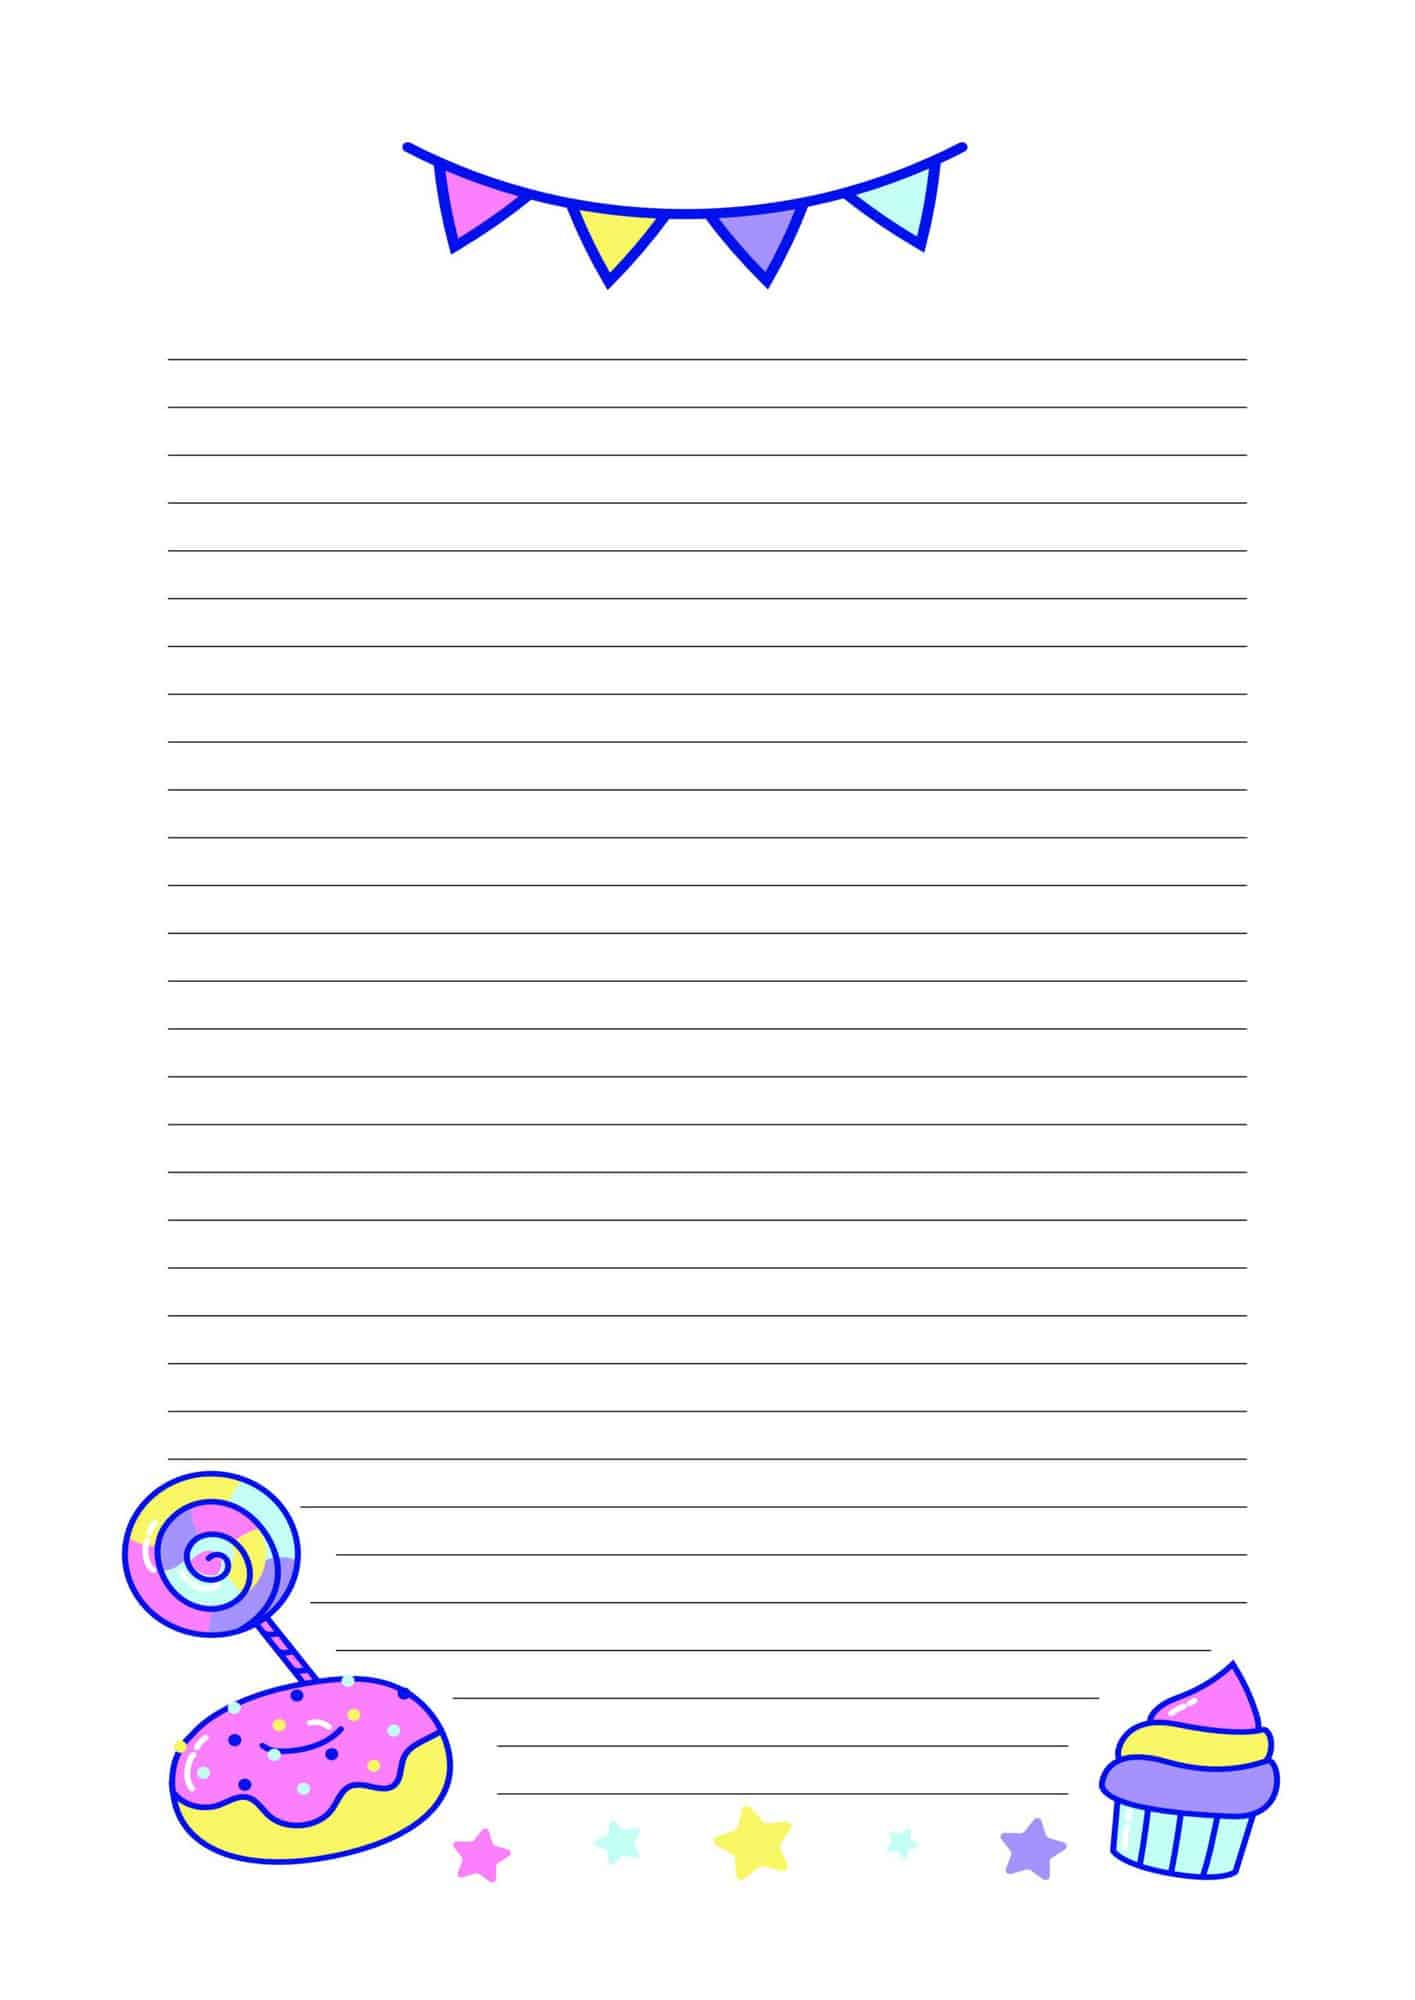 A cute lined paper with bunting, doughnuts and cupcakes images.